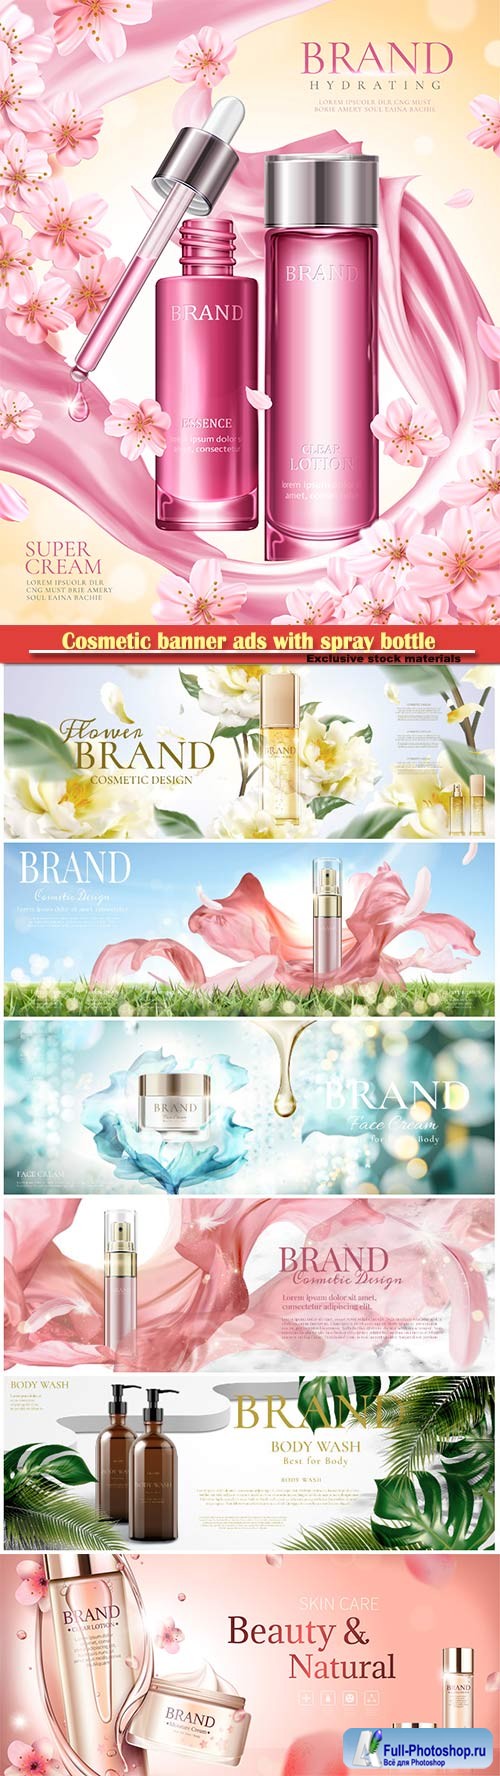 Cosmetic banner ads with spray bottle in 3d illustration vector illustration